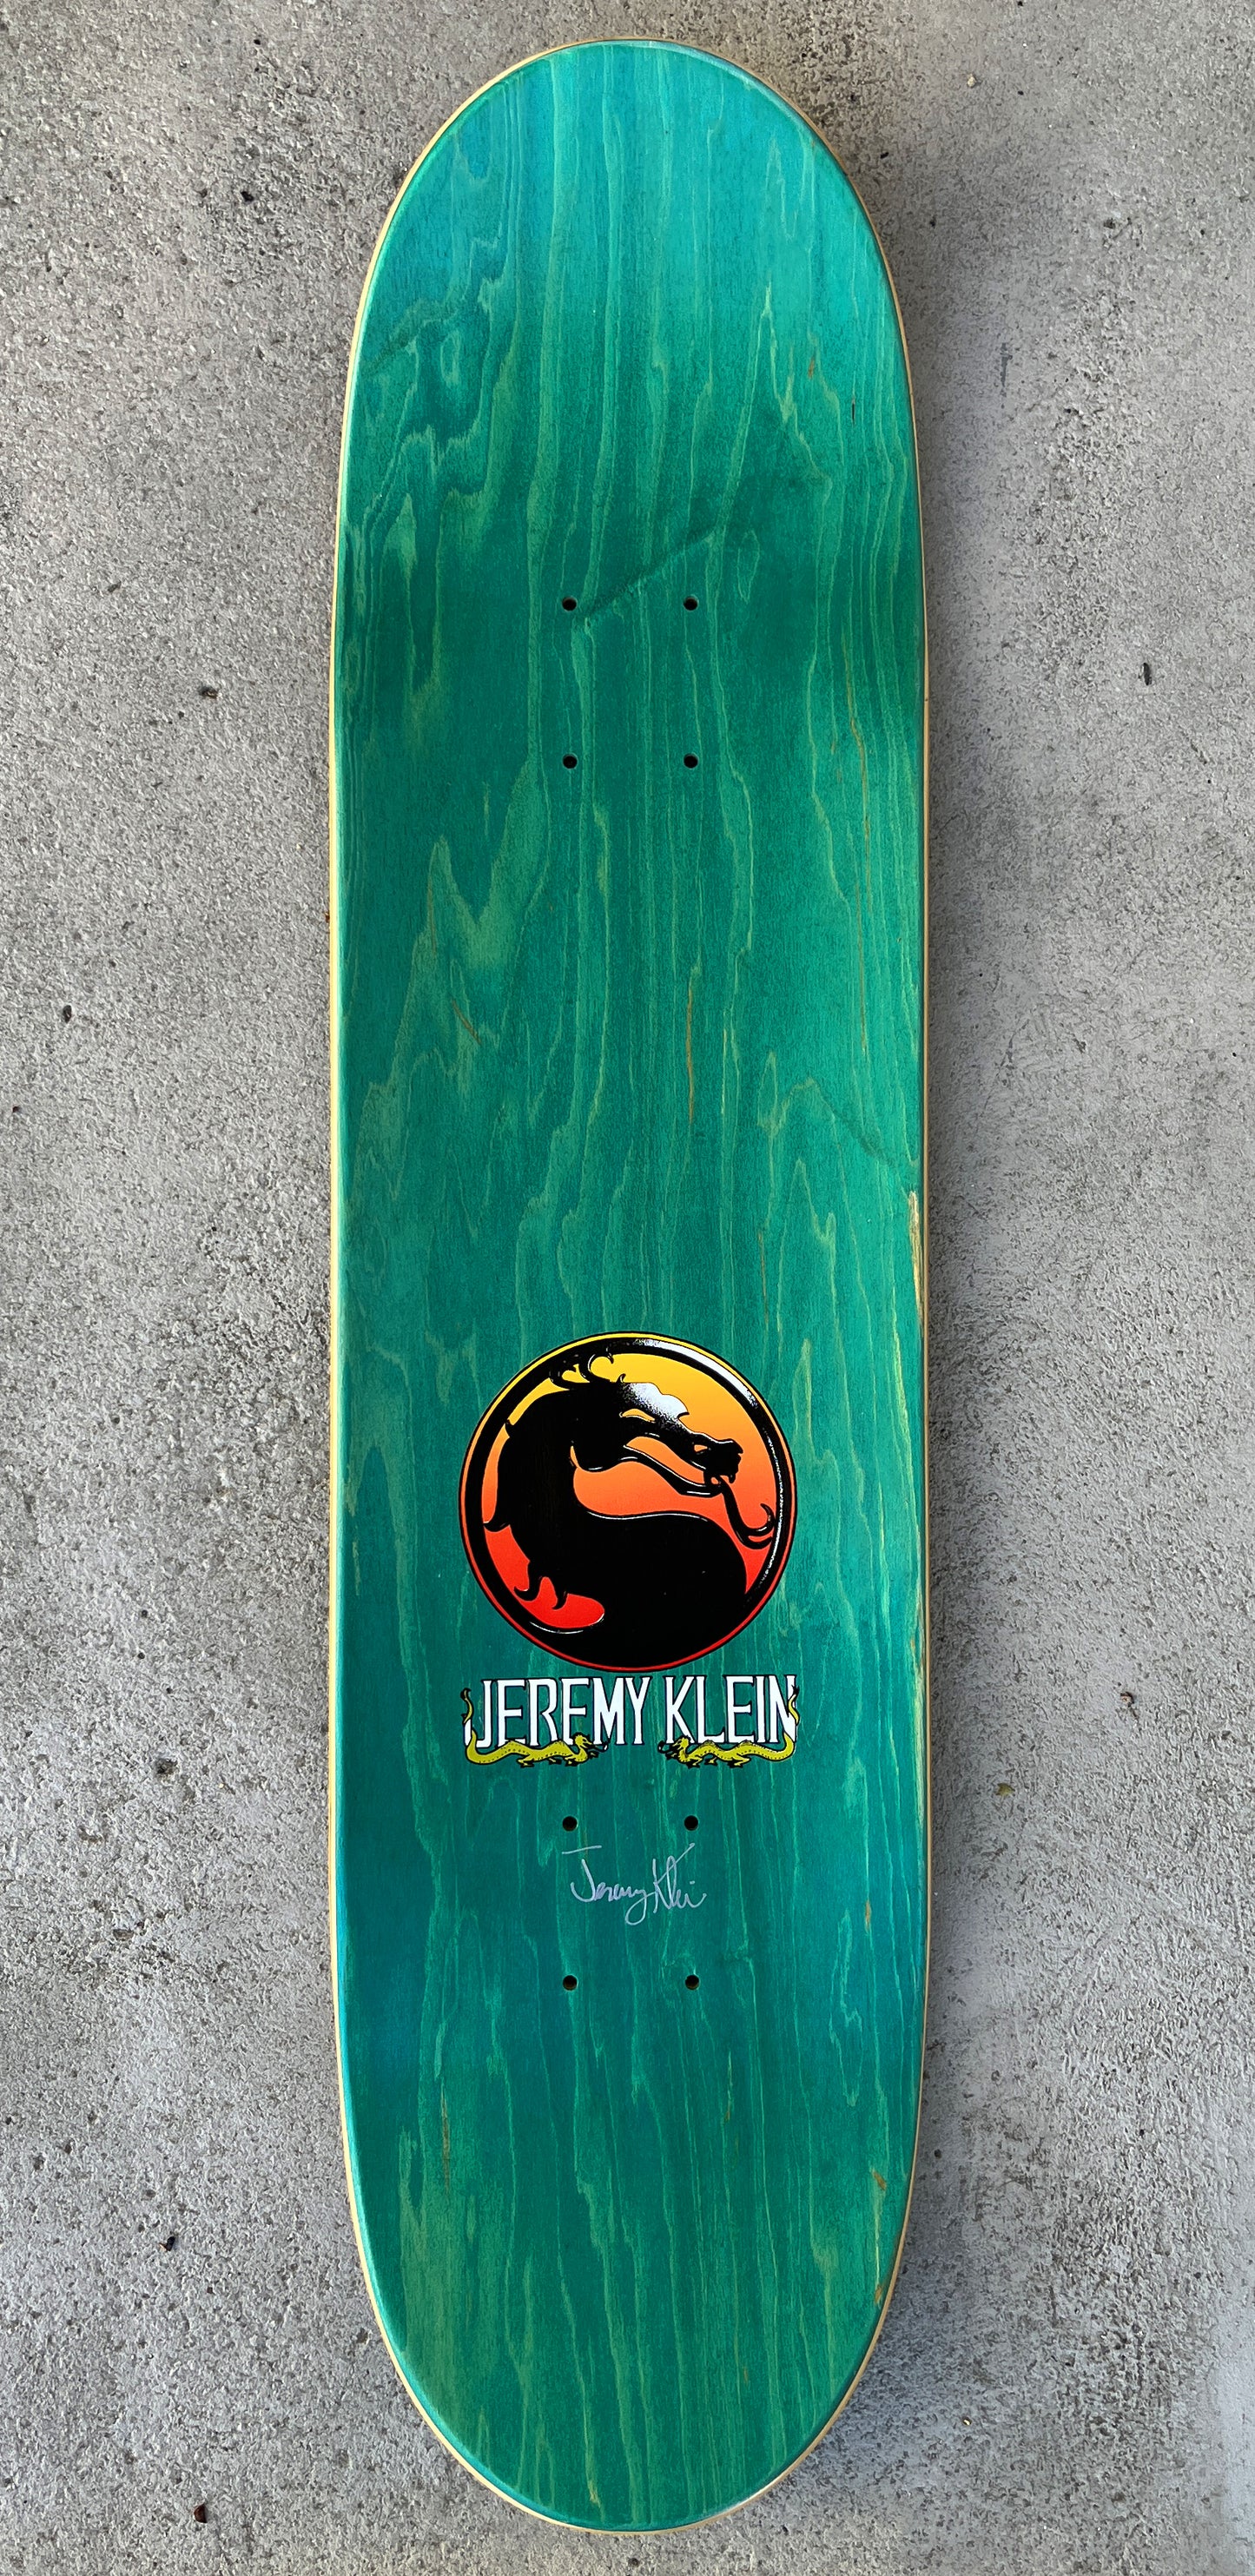 SIGNED jeremy klein dragon 8.0 X 31.75 HAND SCREENED PINK/GREEN ONLY 2 MADE